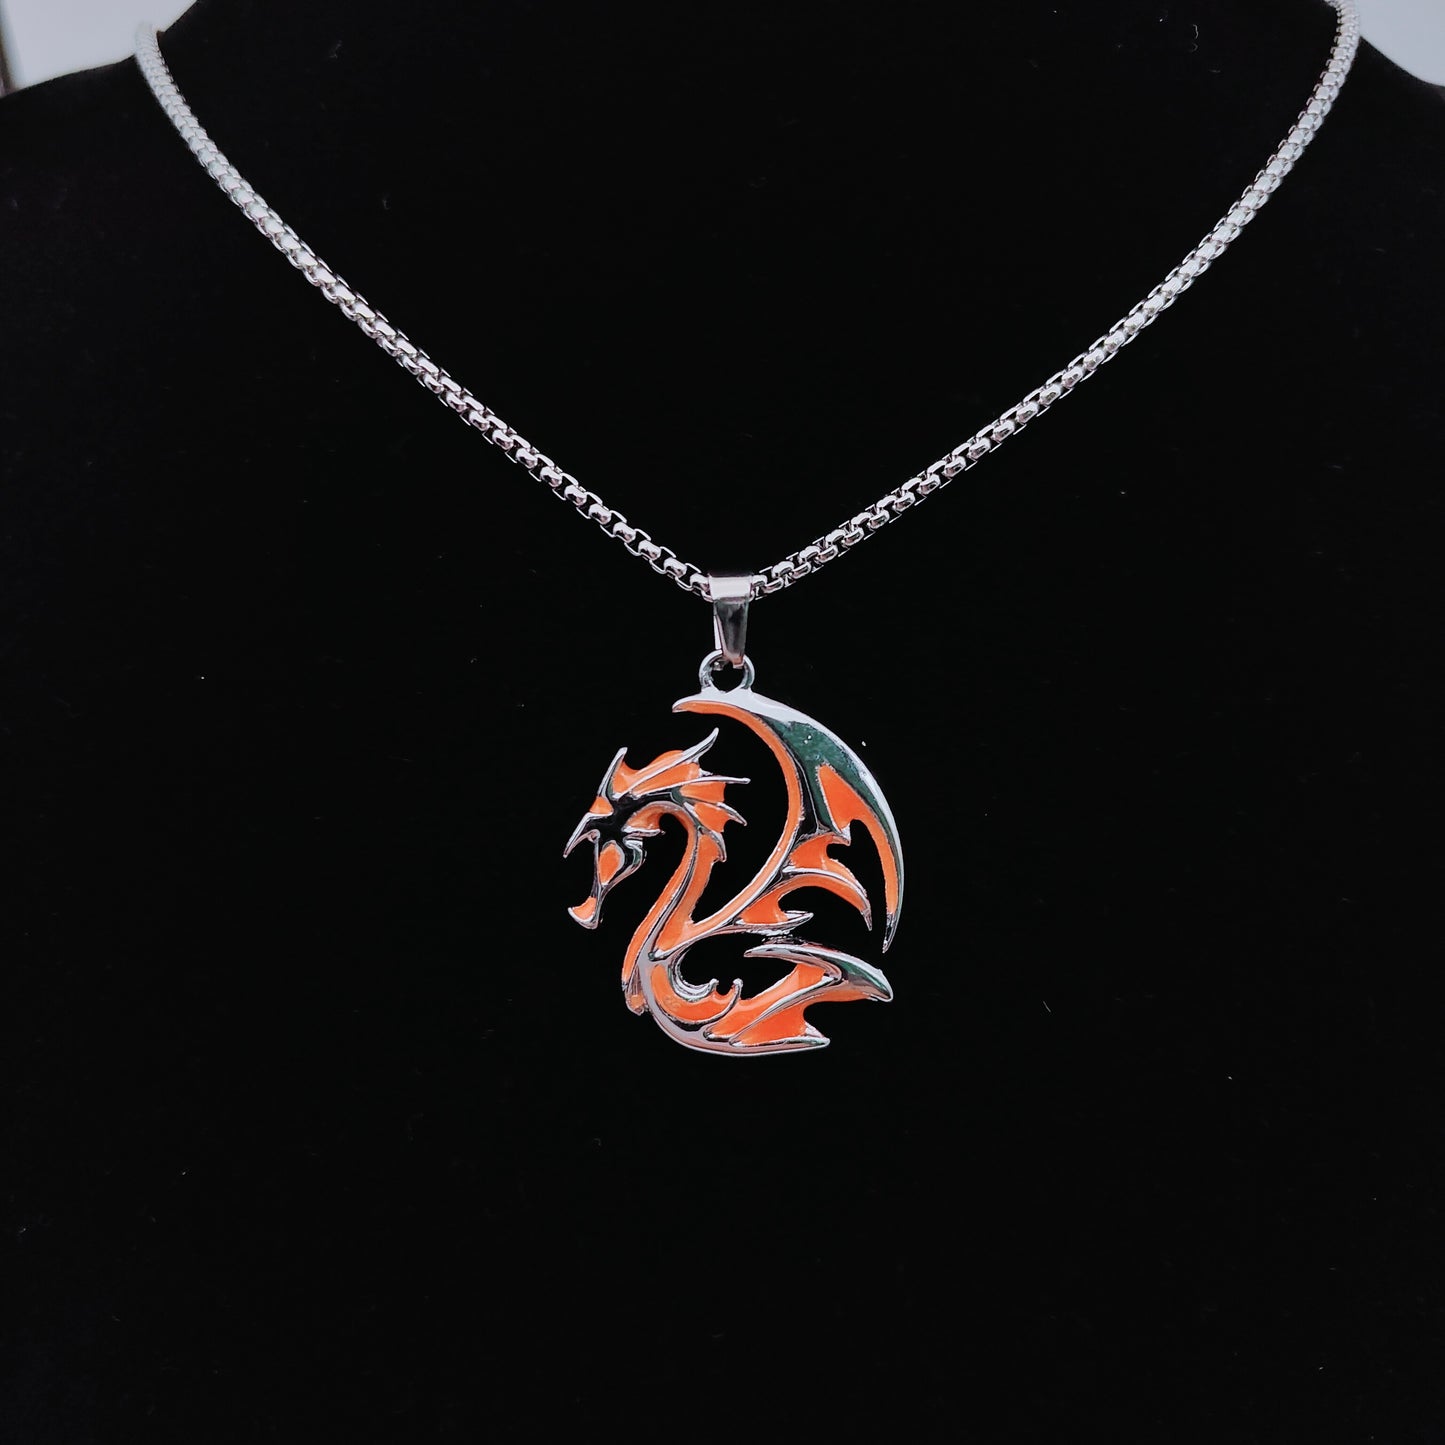 Glow in the Dark Tribal Dragon Pendant and necklace